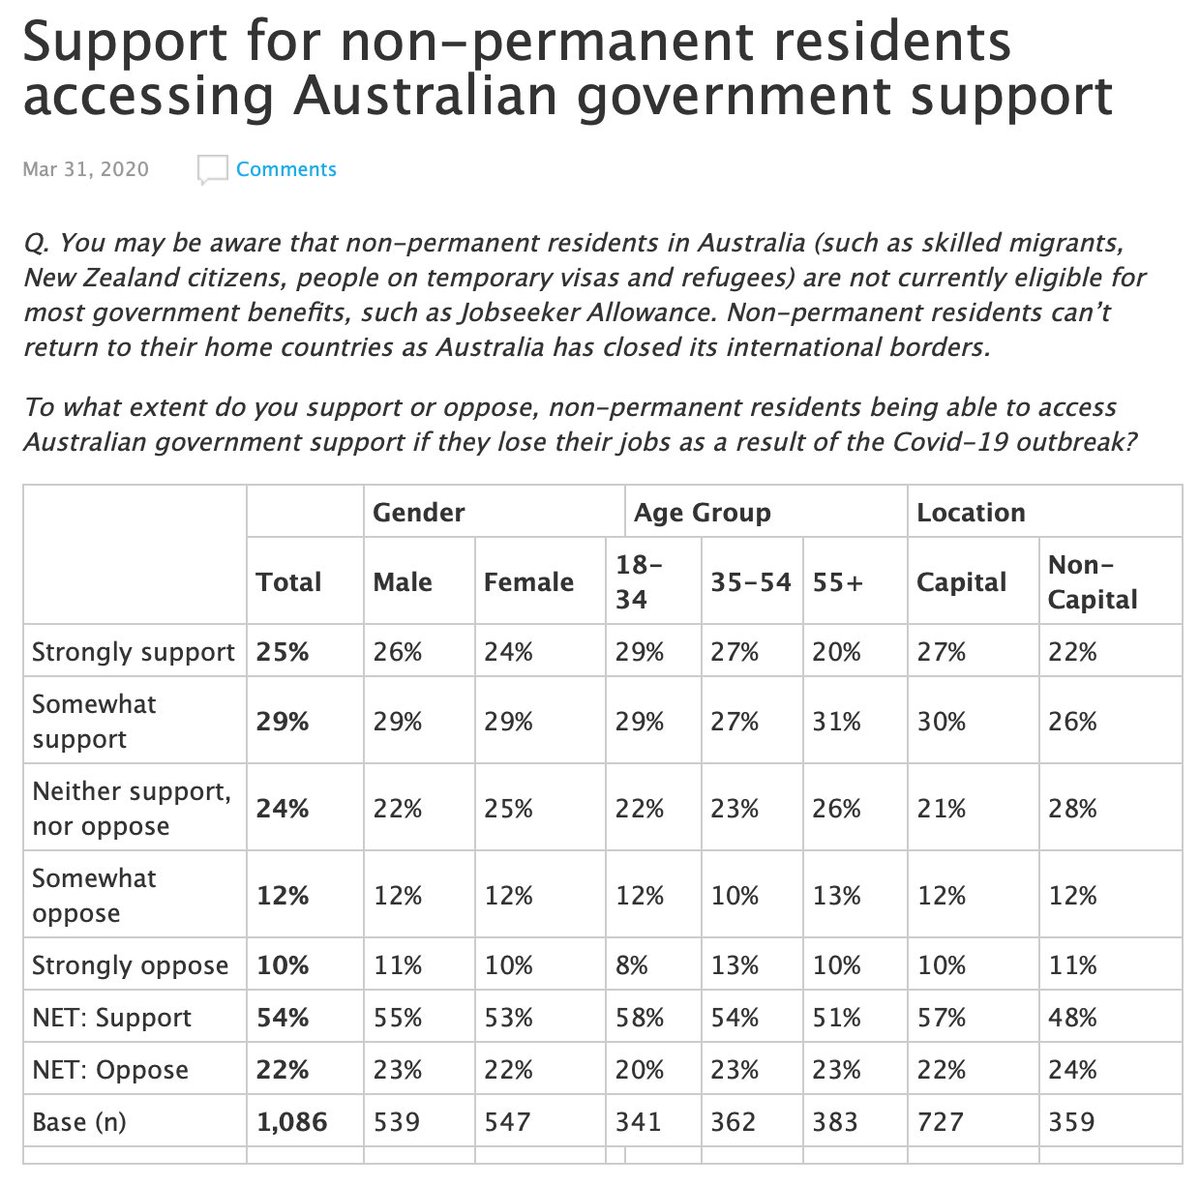 More (54%) support giving government support to non-permanent residents than not (22%).  https://essentialvision.com.au/support-for-non-permanent-residents-accessing-australian-government-support